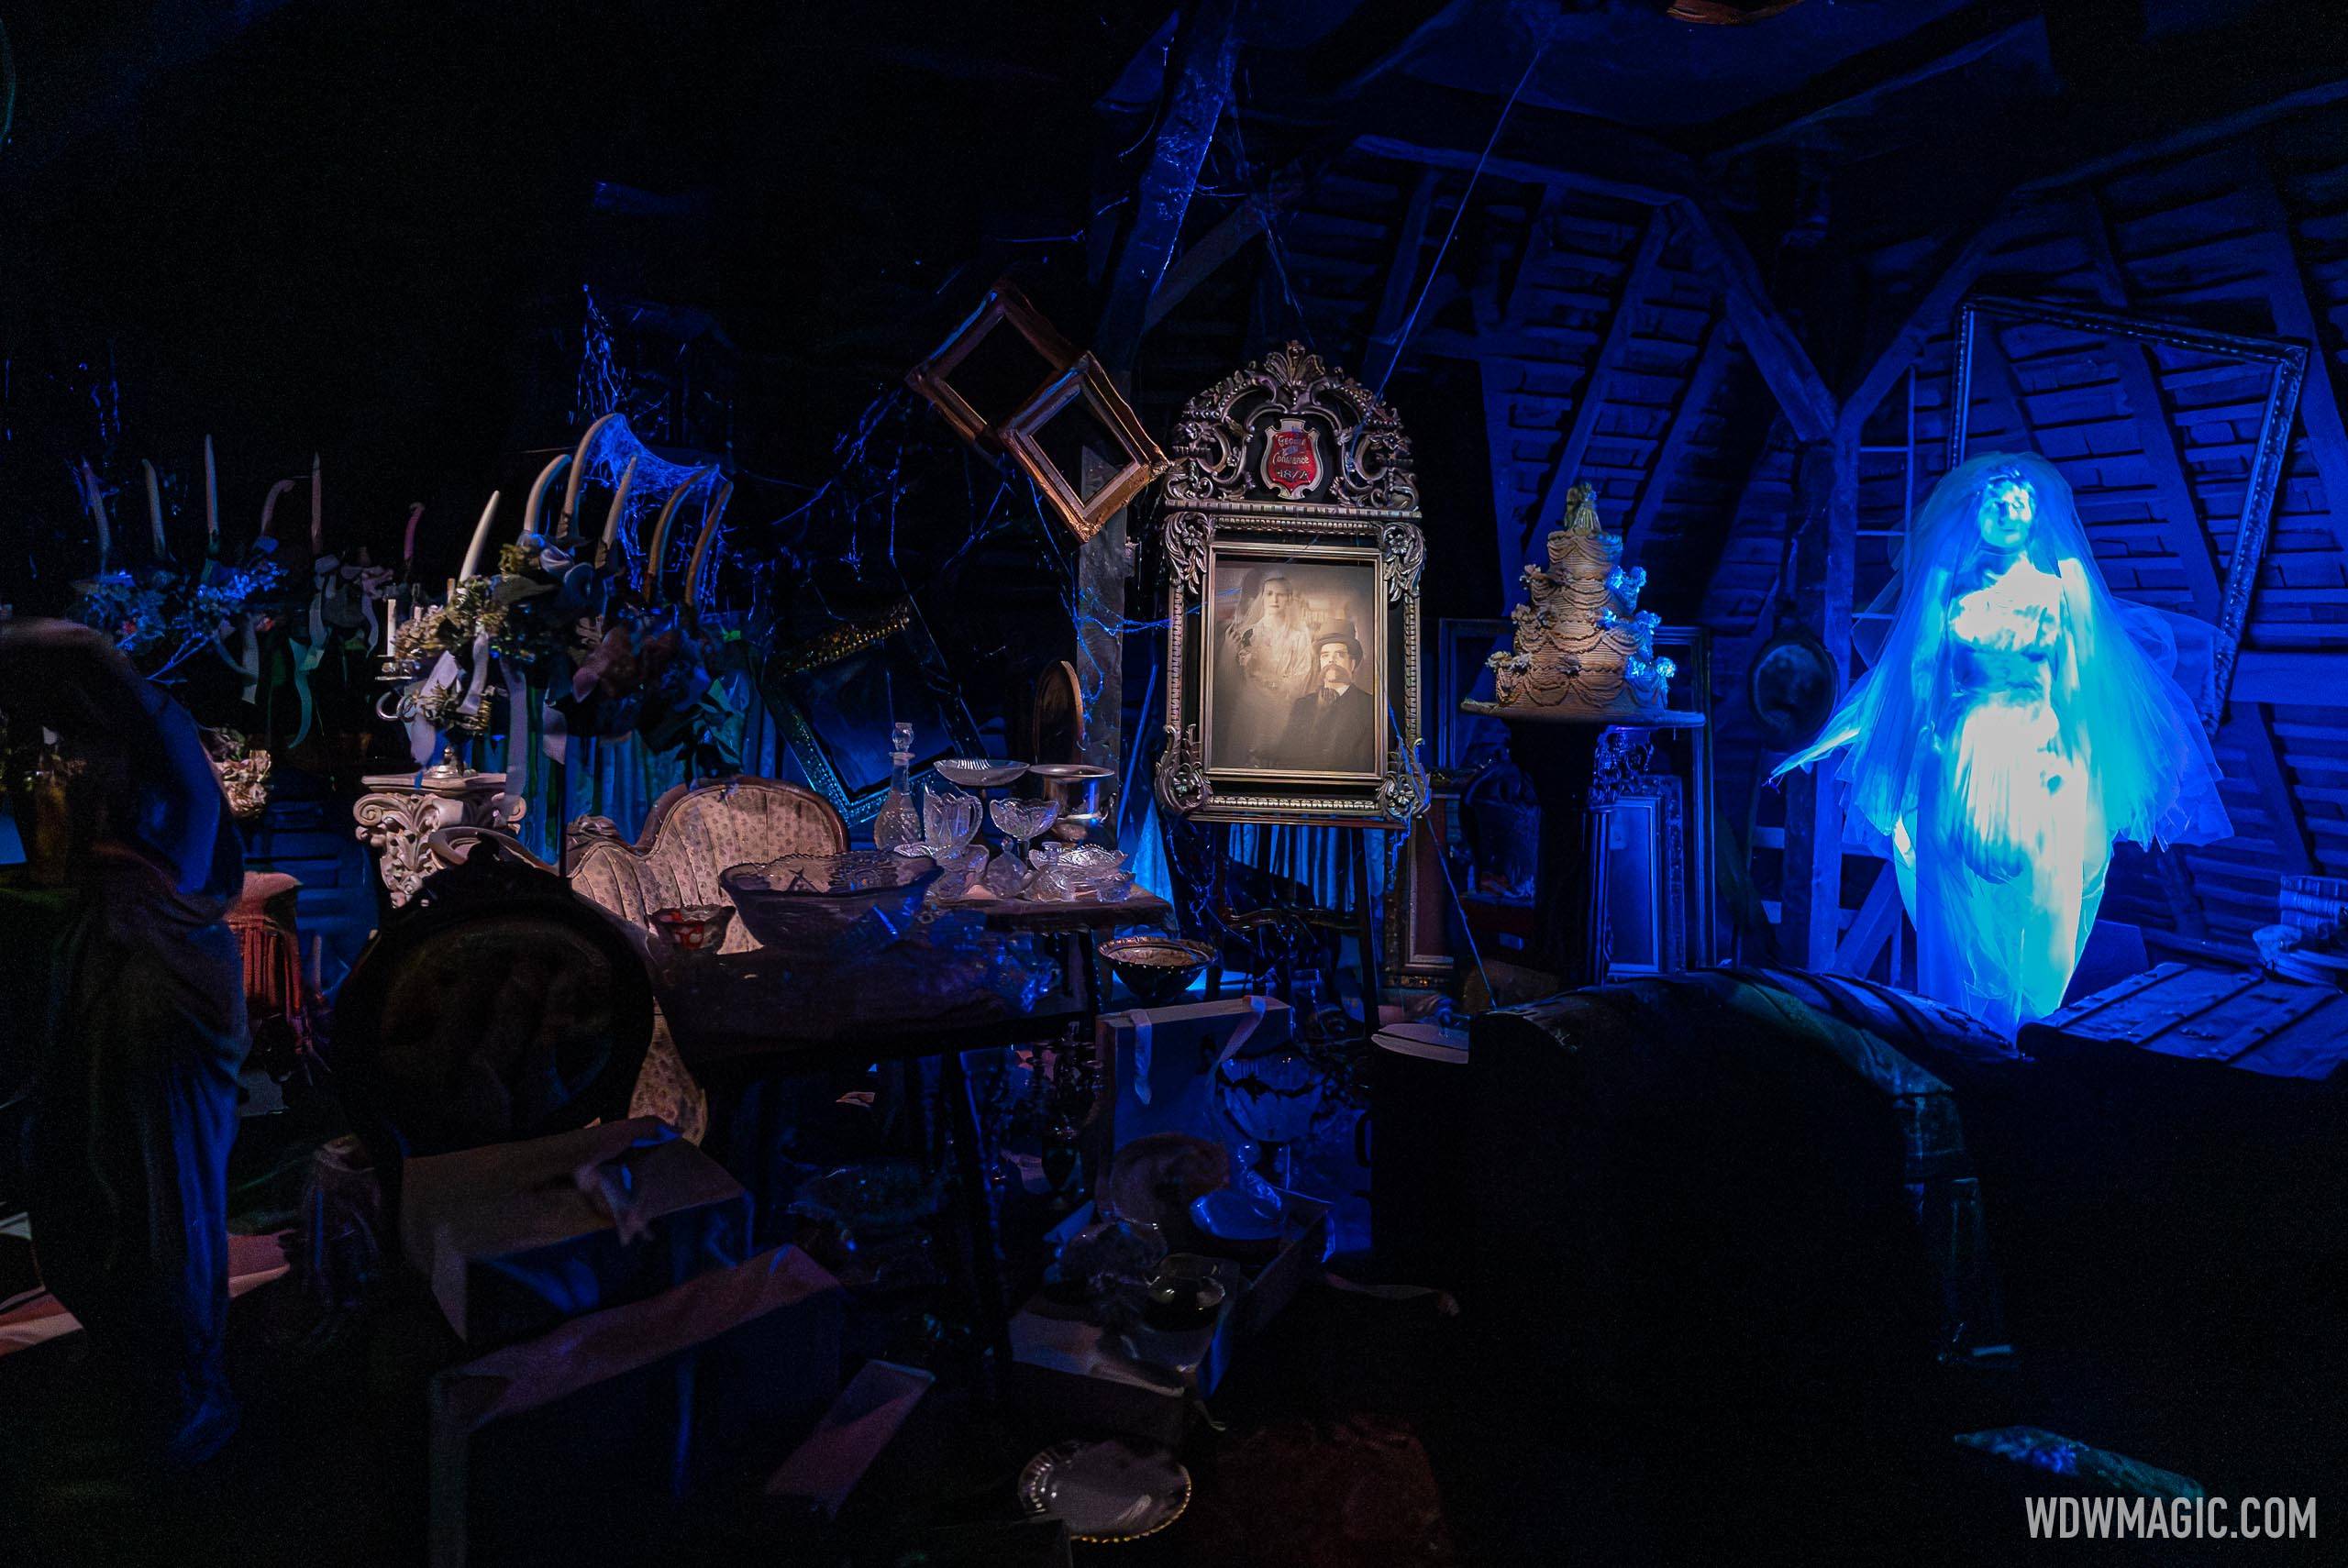 New unload projection effect at the Haunted Mansion